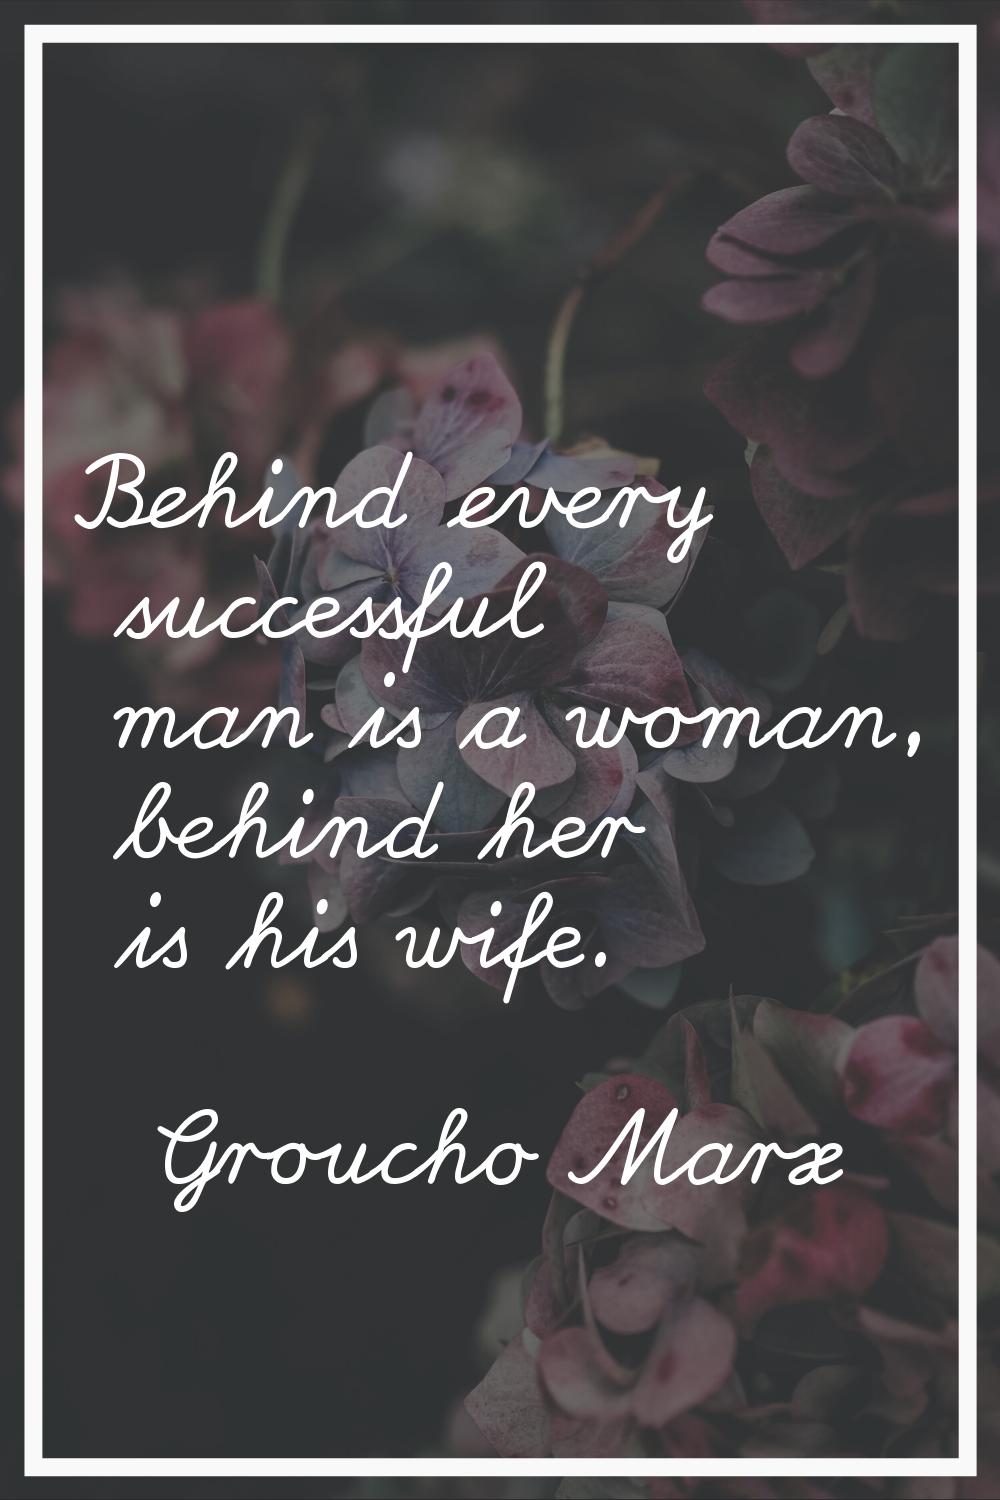 Behind every successful man is a woman, behind her is his wife.